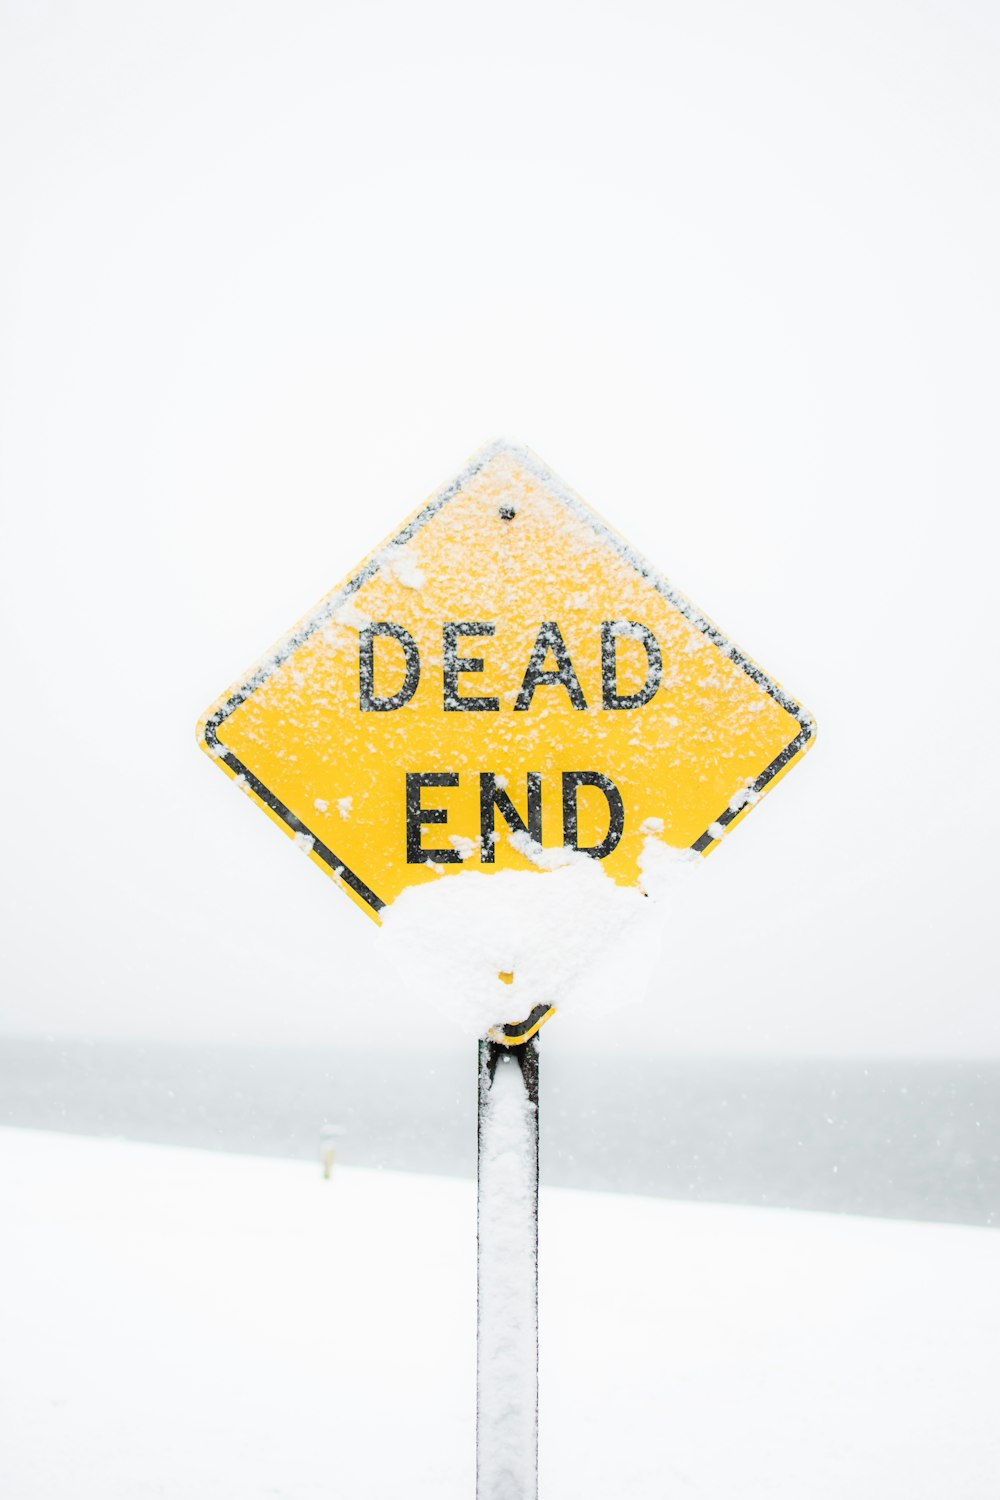 Focus Photography Of Dead End Road Sign Covered With Snow Photo Free Image On Unsplash